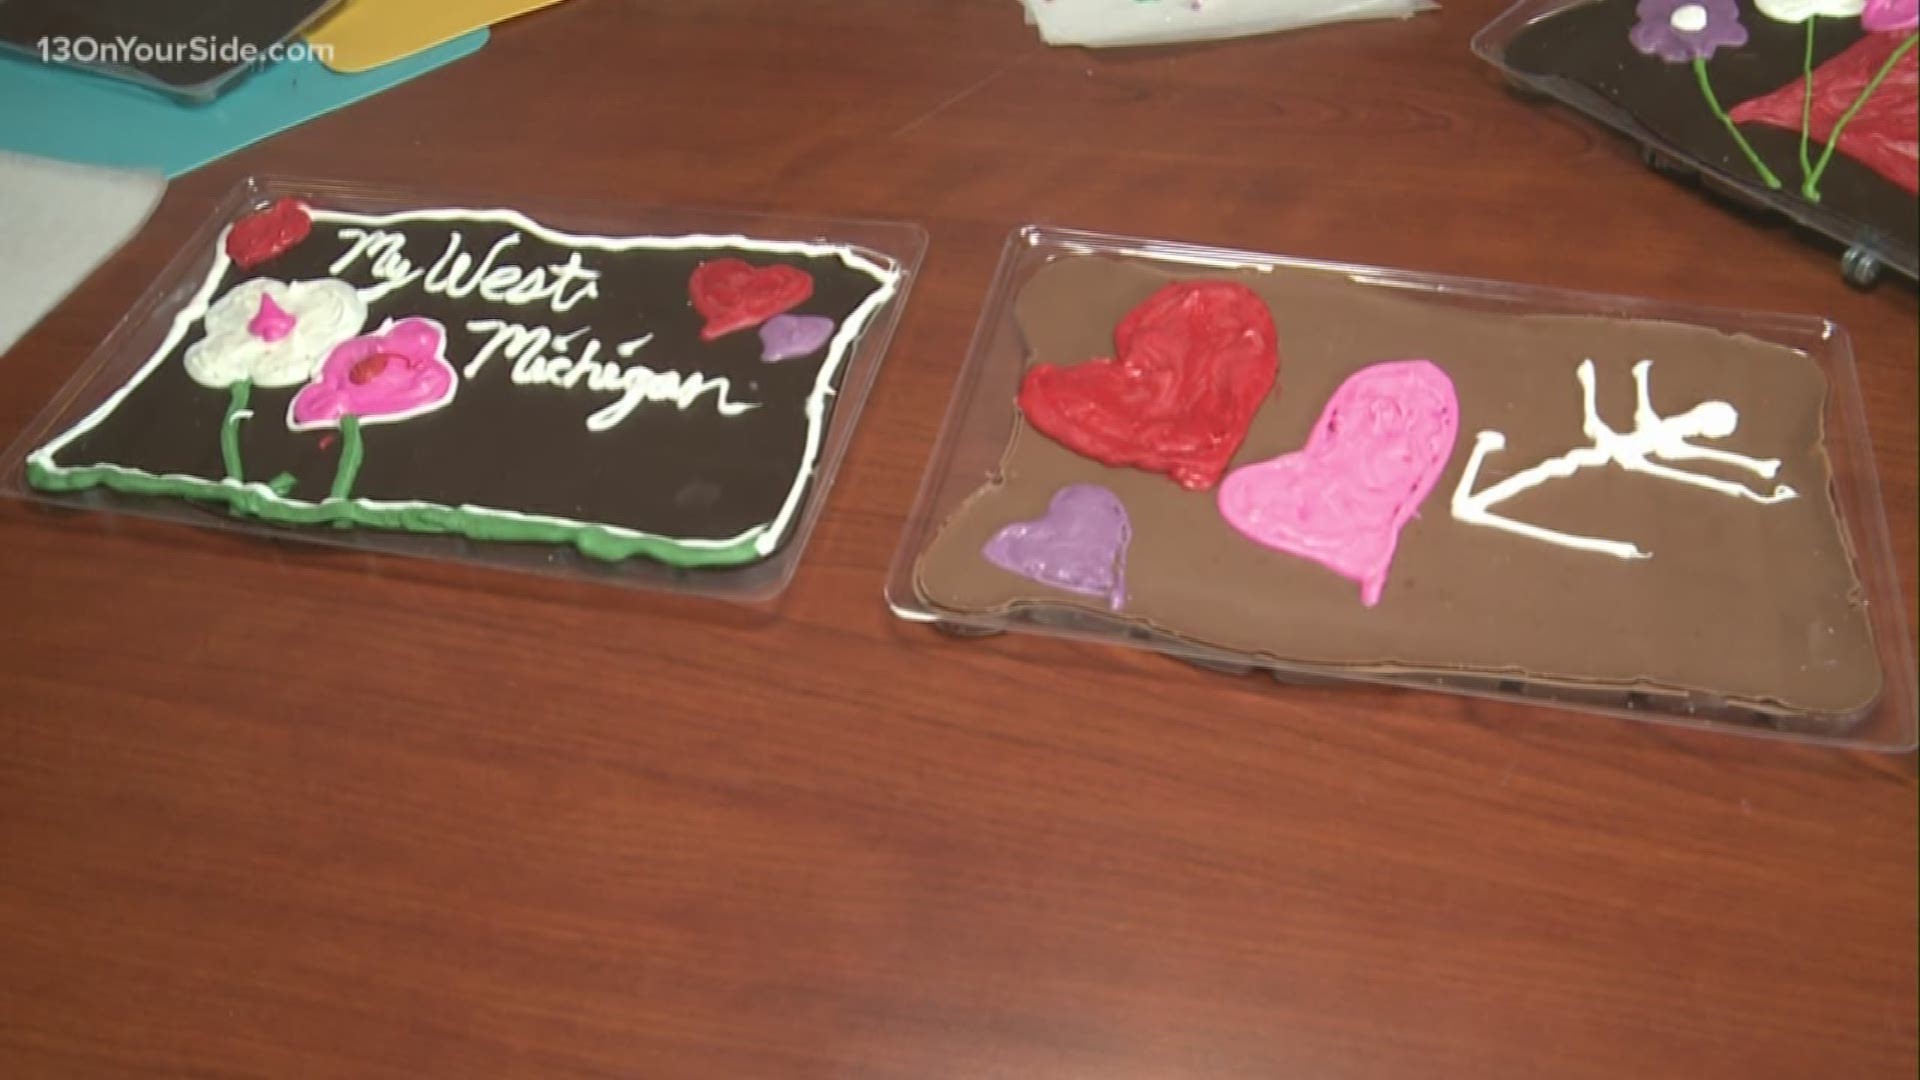 Sasha and Val take a crash course in chocolate making/decorating on My West Michigan Tuesday.